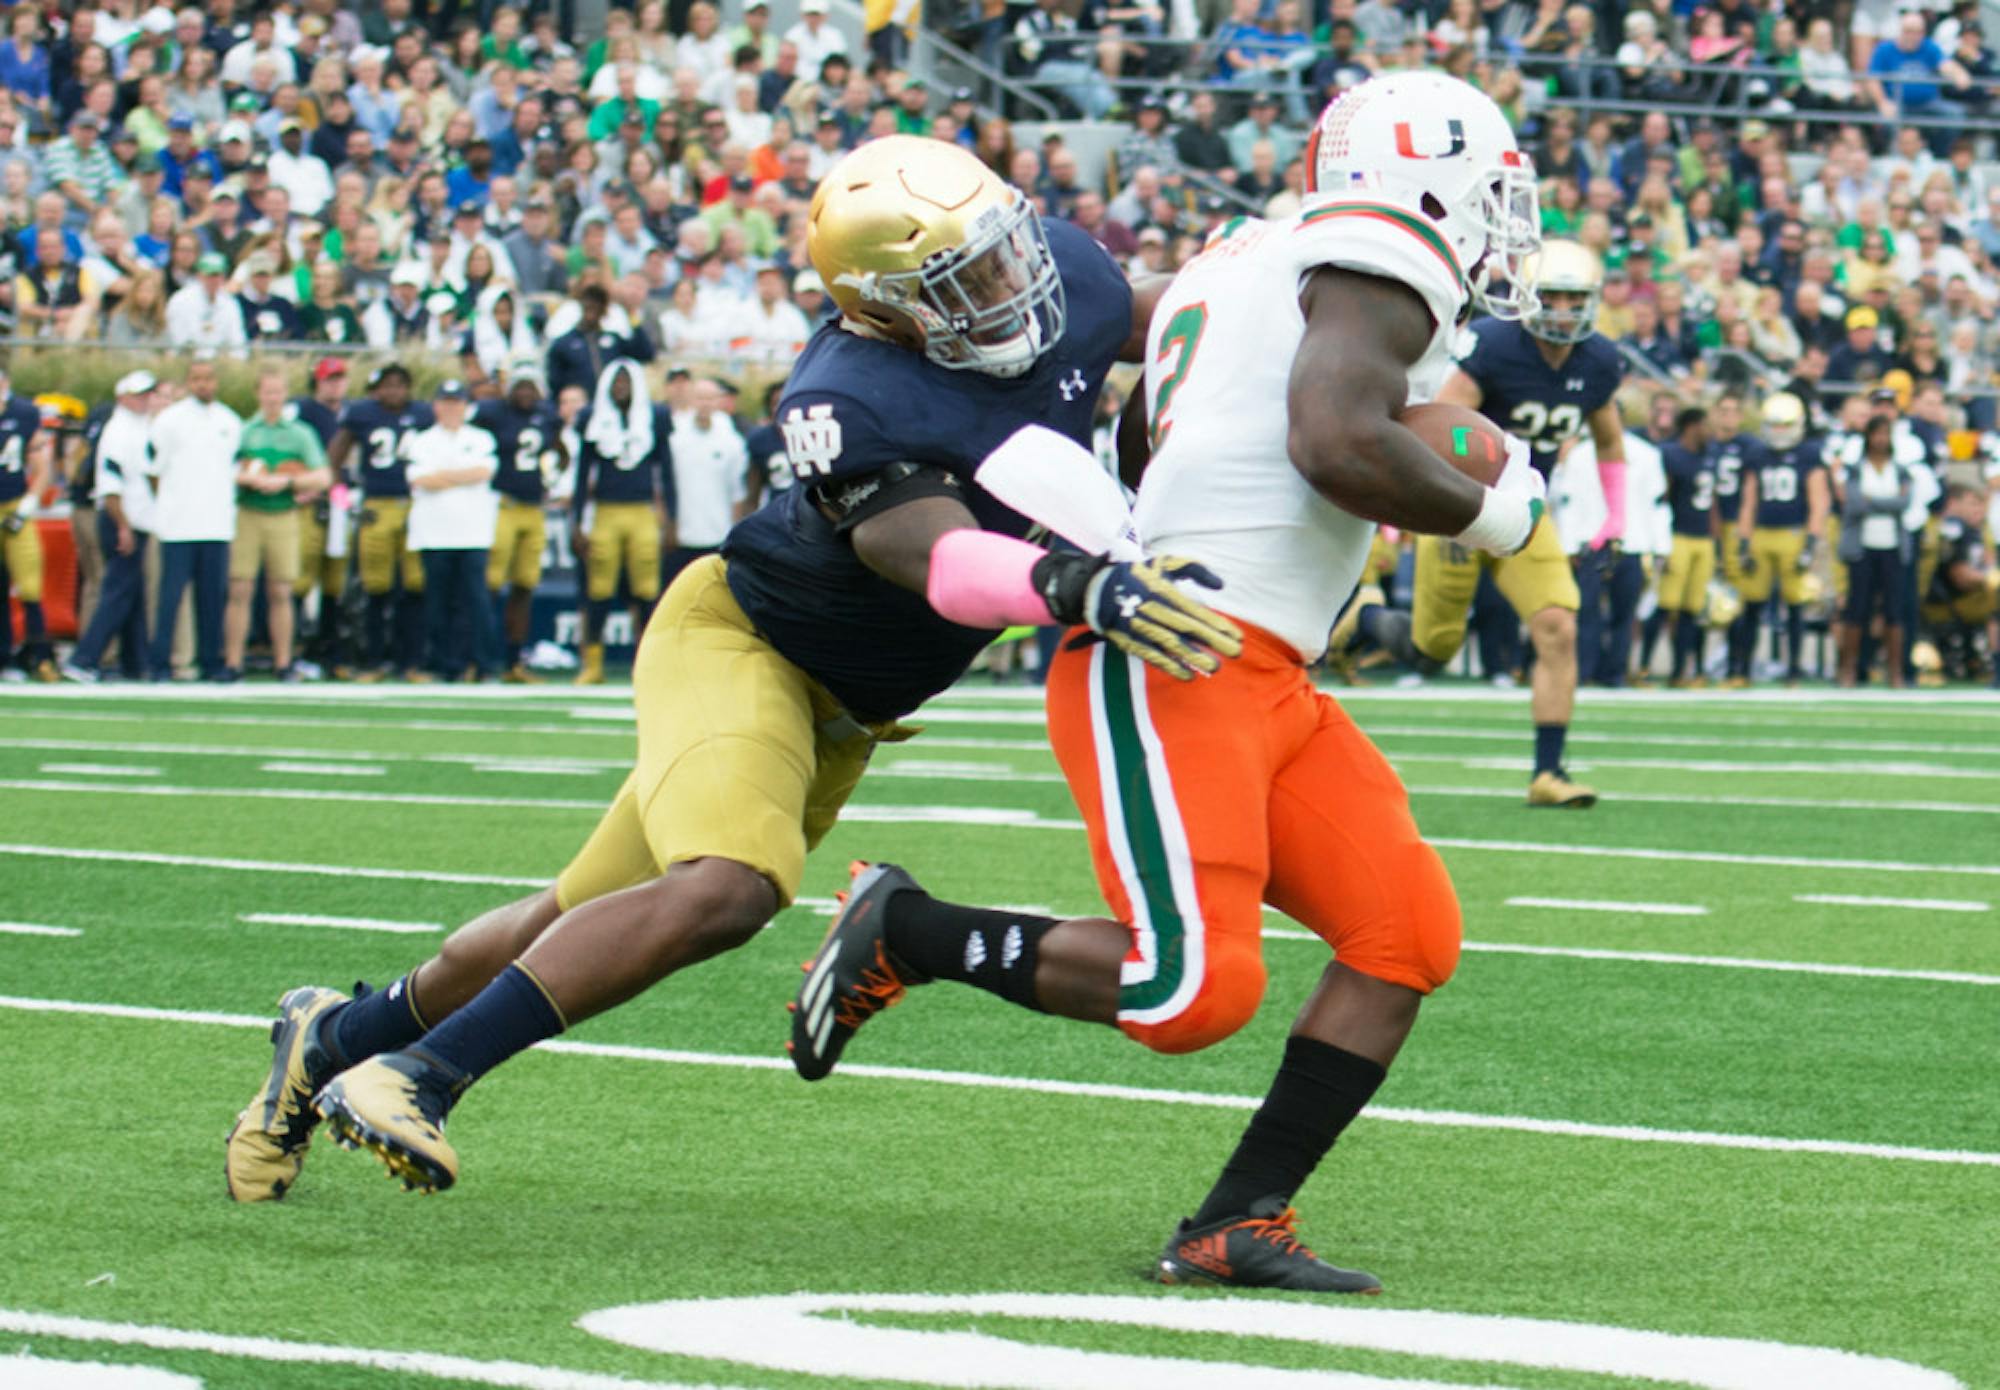 Irish senior linebacker Nyles Morgan tackles a Miami player during Notre Dame’s 30-27 win over Miami (FL) on Oct. 29, 2016, at Notre Dame Stadium. The Irish landed three linebacker commits this summer, which will fill the holes left by the graduation of Morgan and seniors Drue Tranquill and Greer Martini after this season.